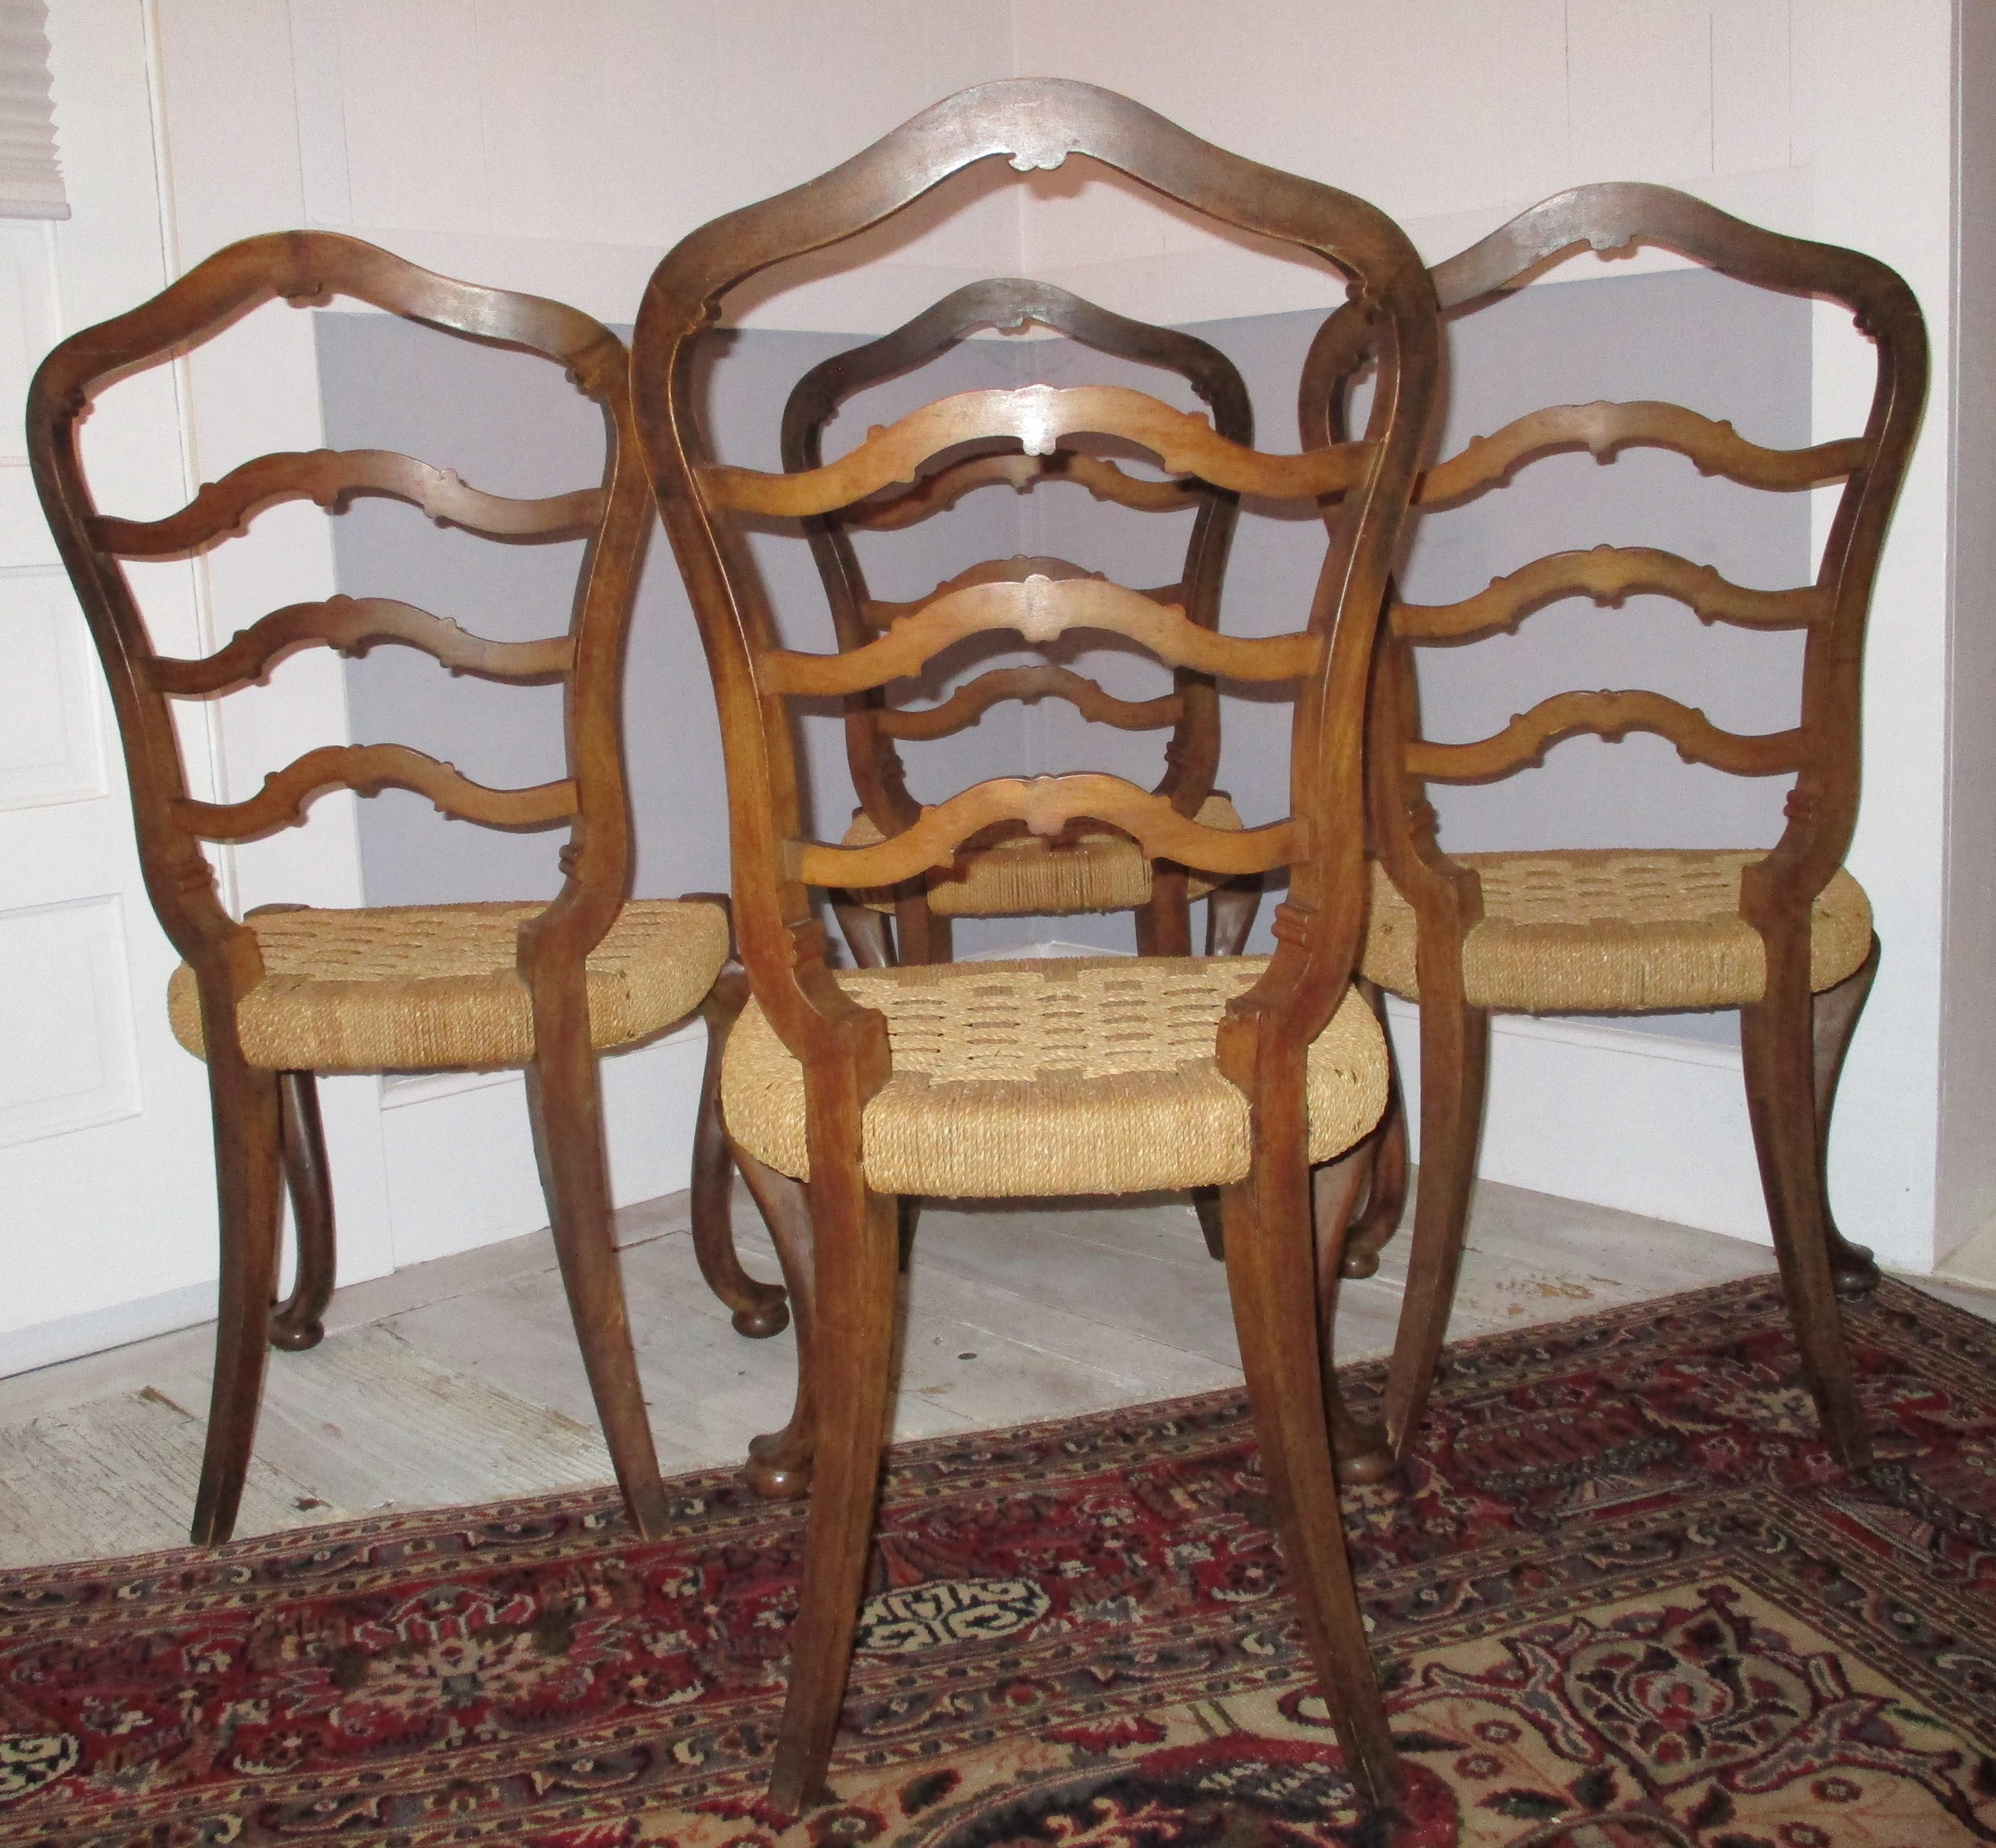 Italian Ladder Back, Cabriolet Leg Chairs with Hoof Feet and Rush Seats   im Zustand „Gut“ im Angebot in Oregon, OR